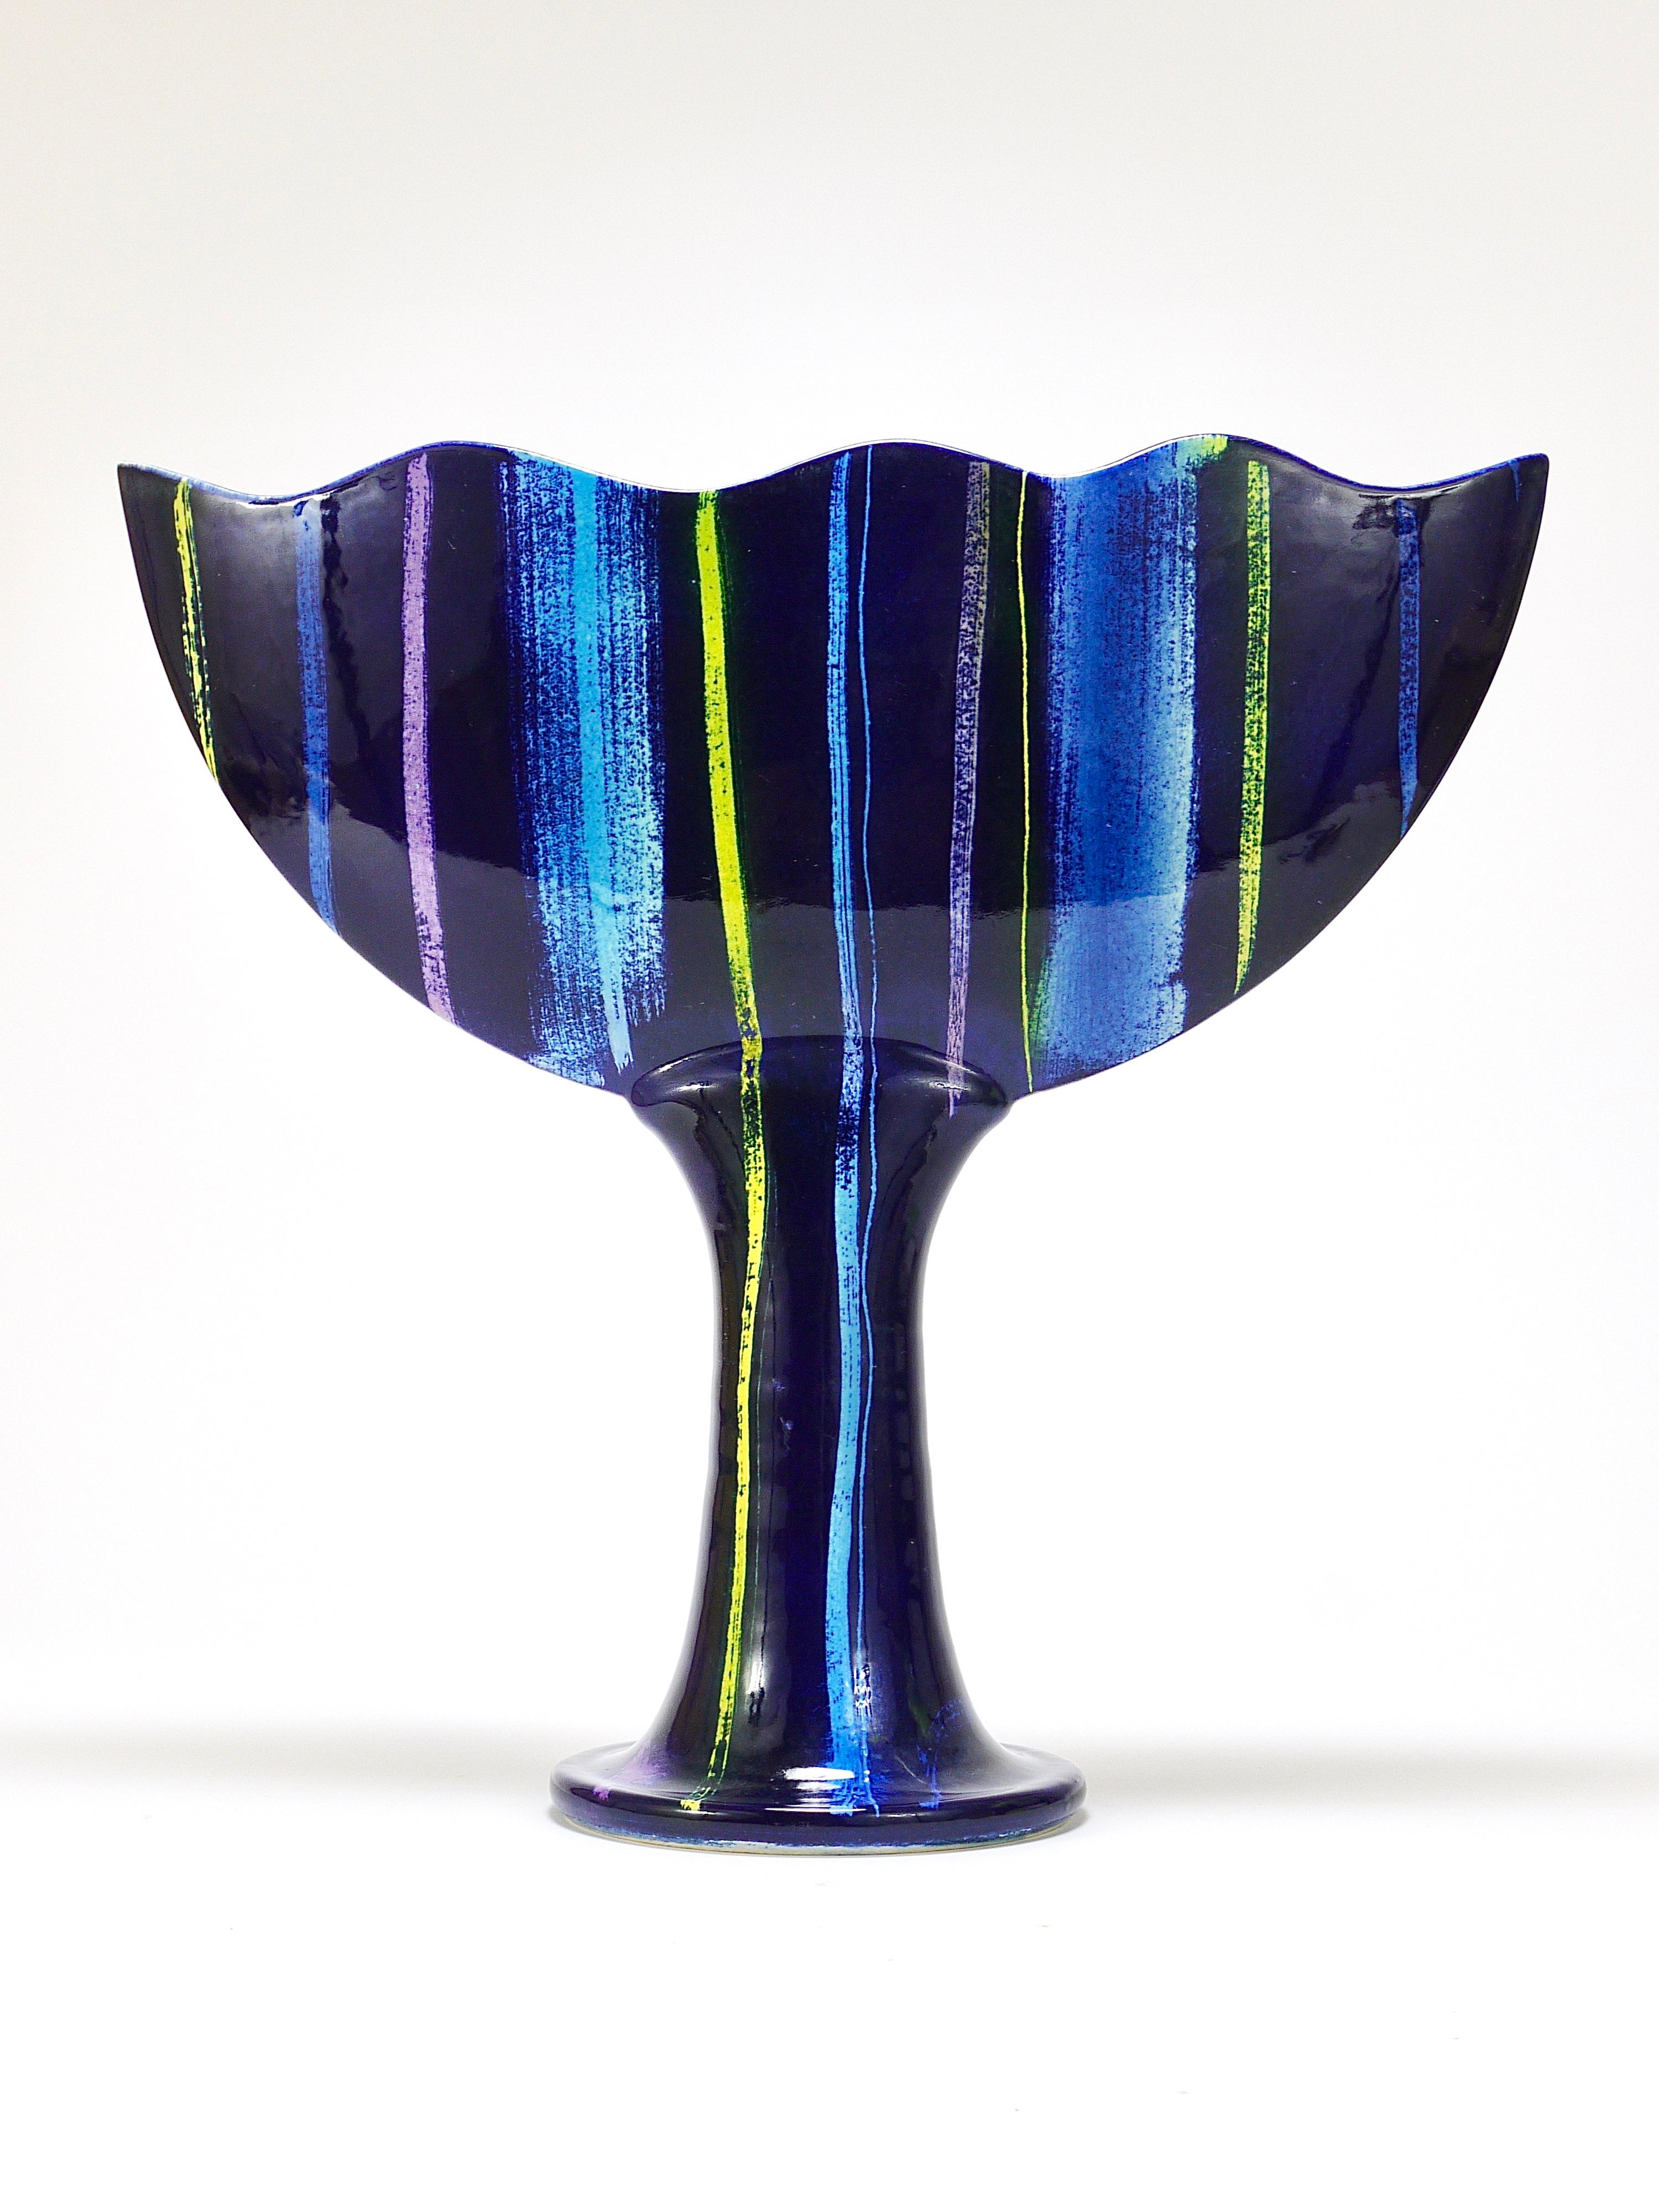 A beautiful sculptural post-modern ceramic vase by Jesper Packness, Denmark. A decorative piece with a cobalt blue shiny glaze and stripes in different colors. Signed on its underneath. In very good condition.
